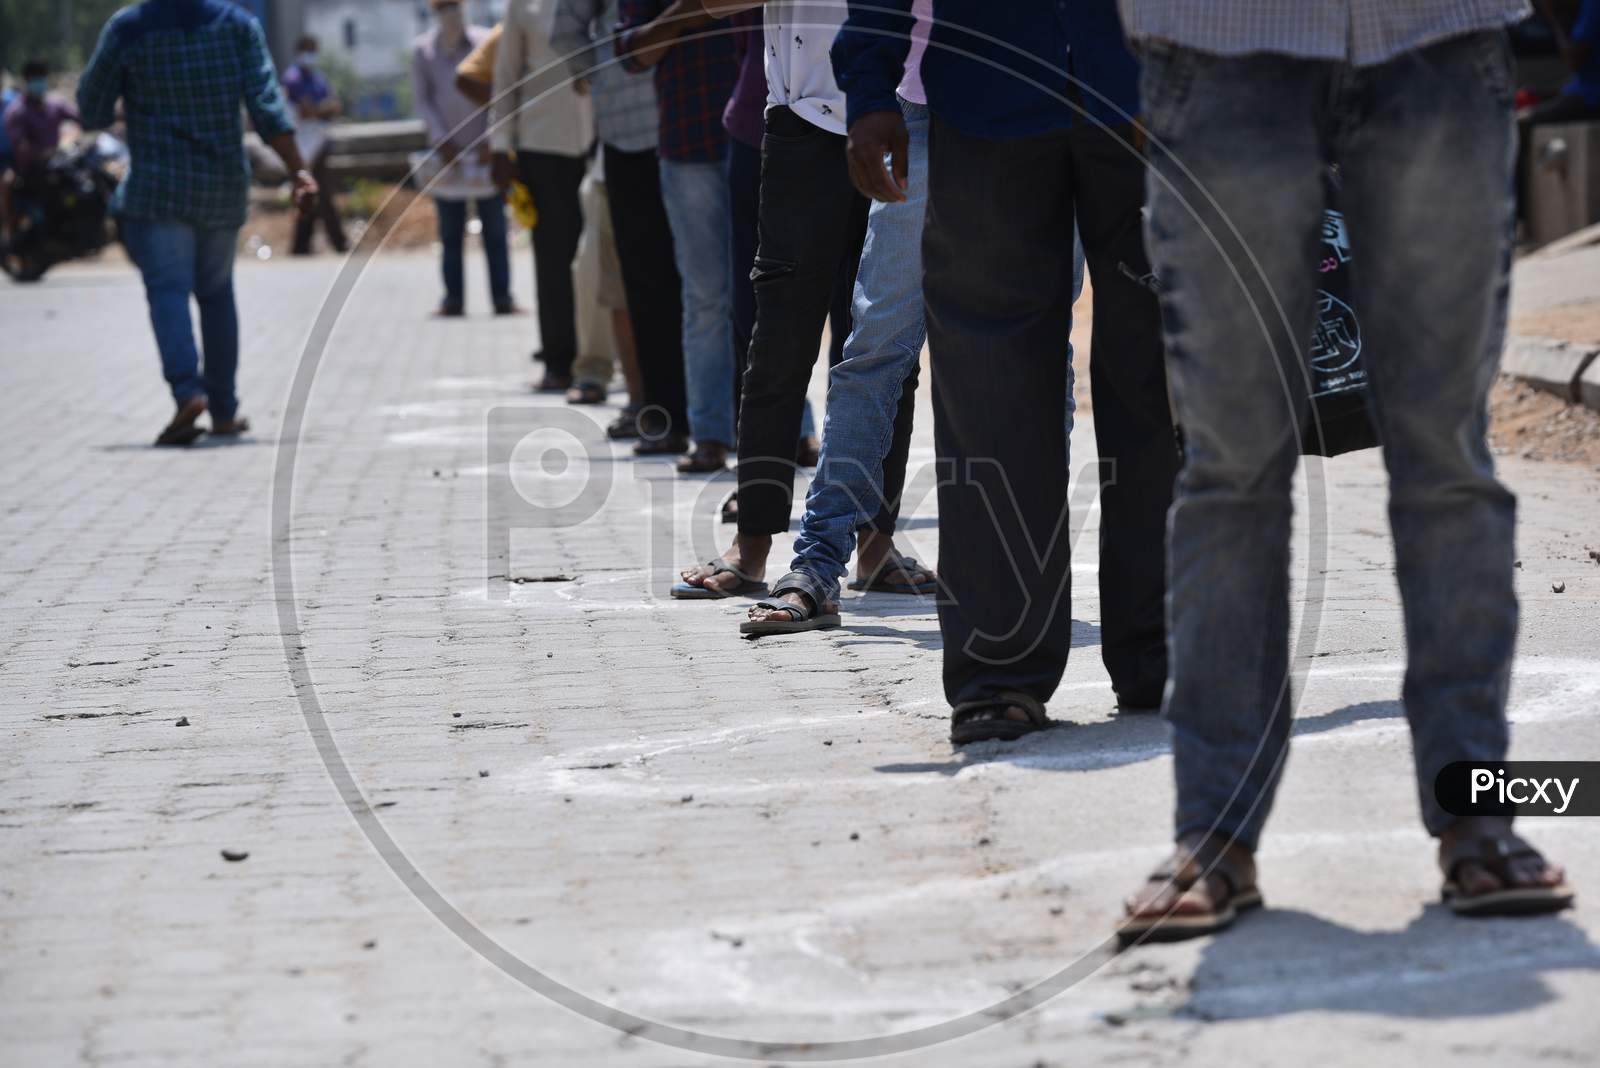 People maintain social distancing by standing in the circles drawn at a super market in Moosapet Y Junction, Hyderabad amid lockdown due to Corona Virus pandemic